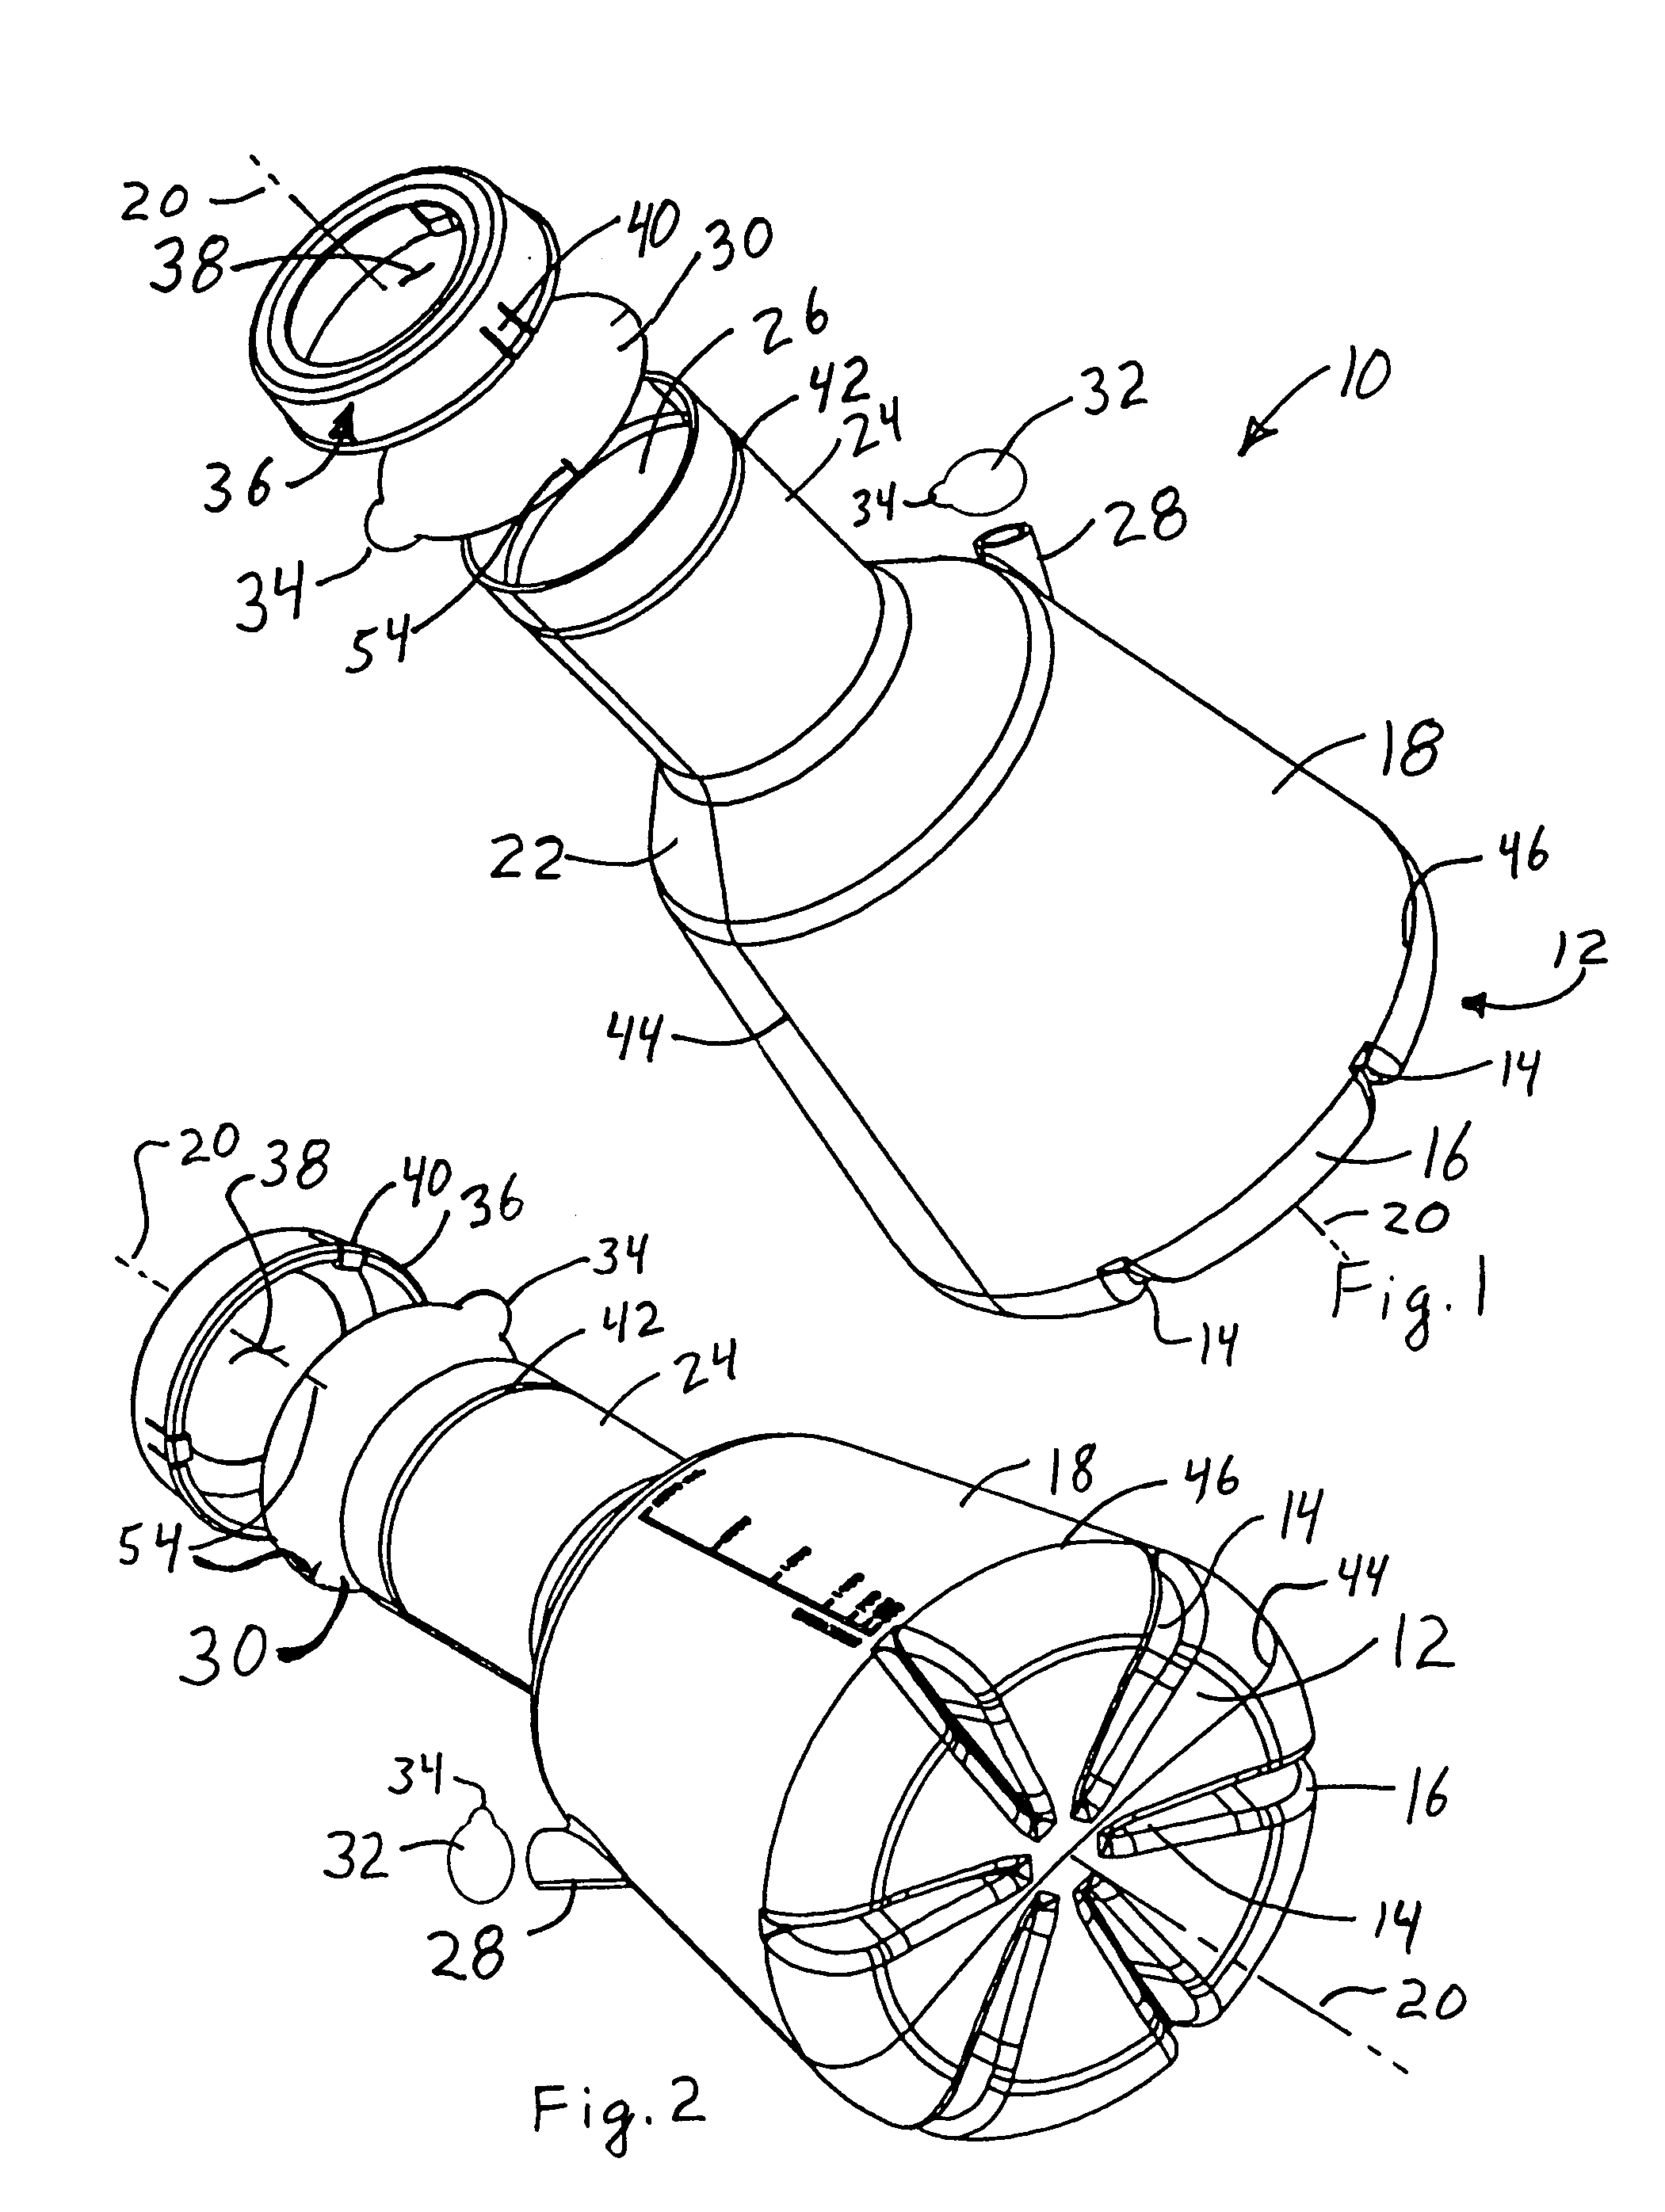 Fermentation flask for cultivating microorganisms